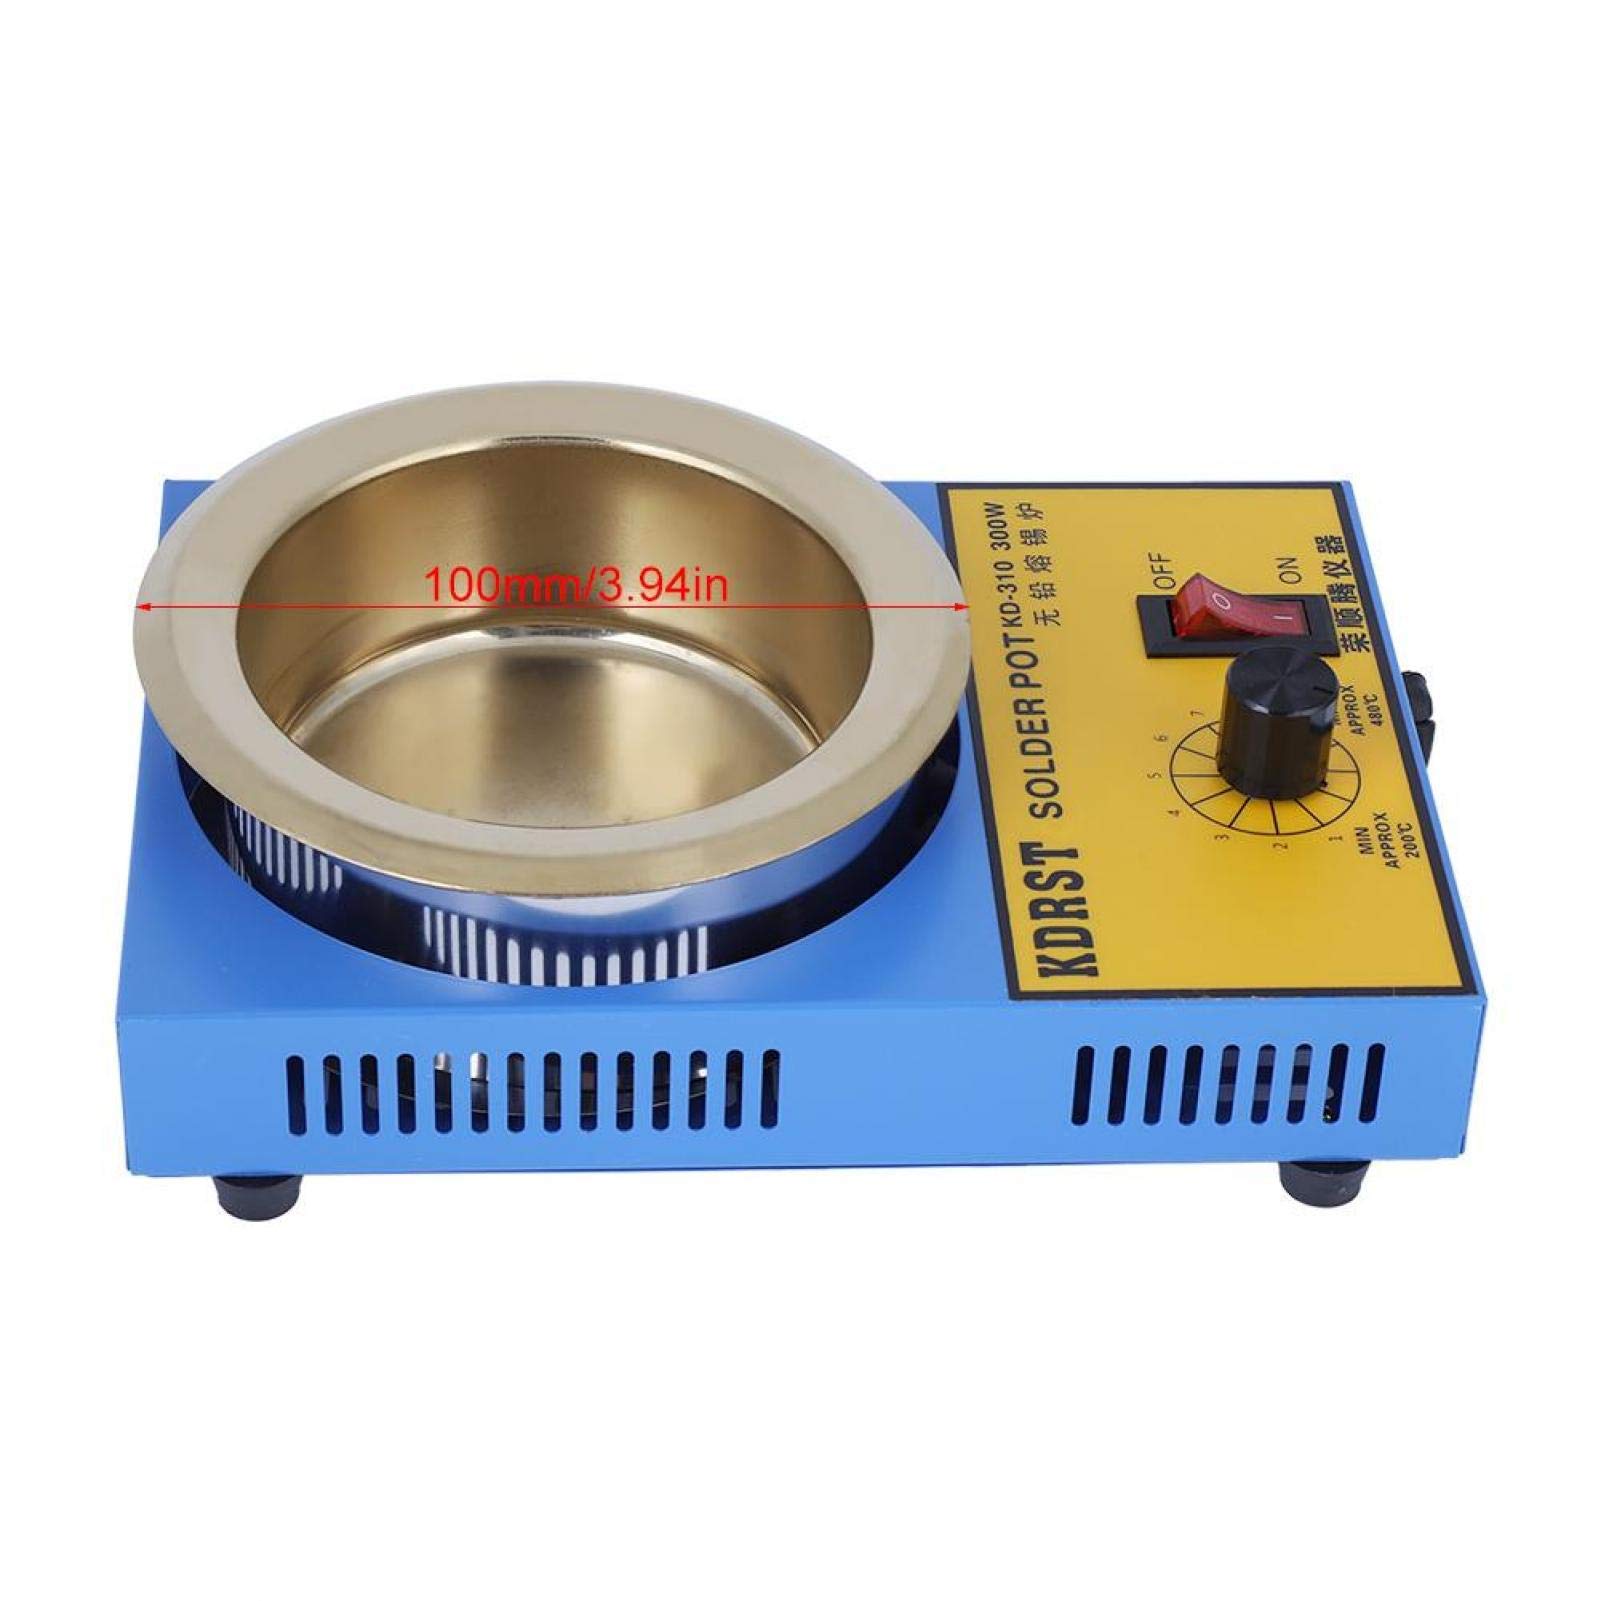 cUYT Soldering Desoldering Bath, Solder Pot, Portable Electronic Wire Production for coil Pin Tin Plating Electronic (US standar